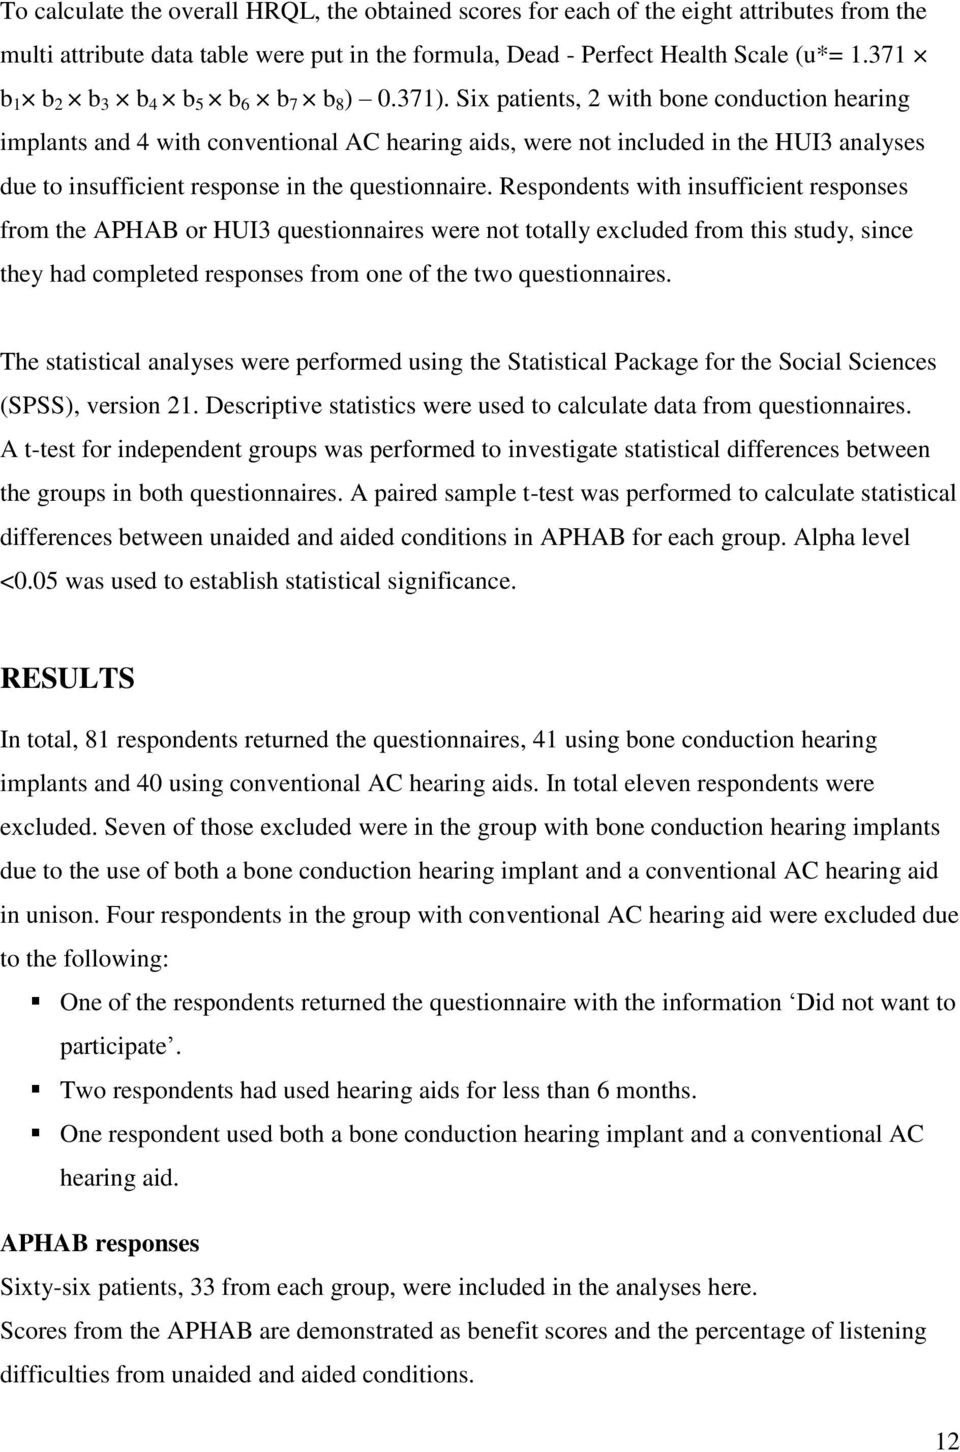 Six patients, 2 with bone conduction hearing implants and 4 with conventional AC hearing aids, were not included in the HUI3 analyses due to insufficient response in the questionnaire.